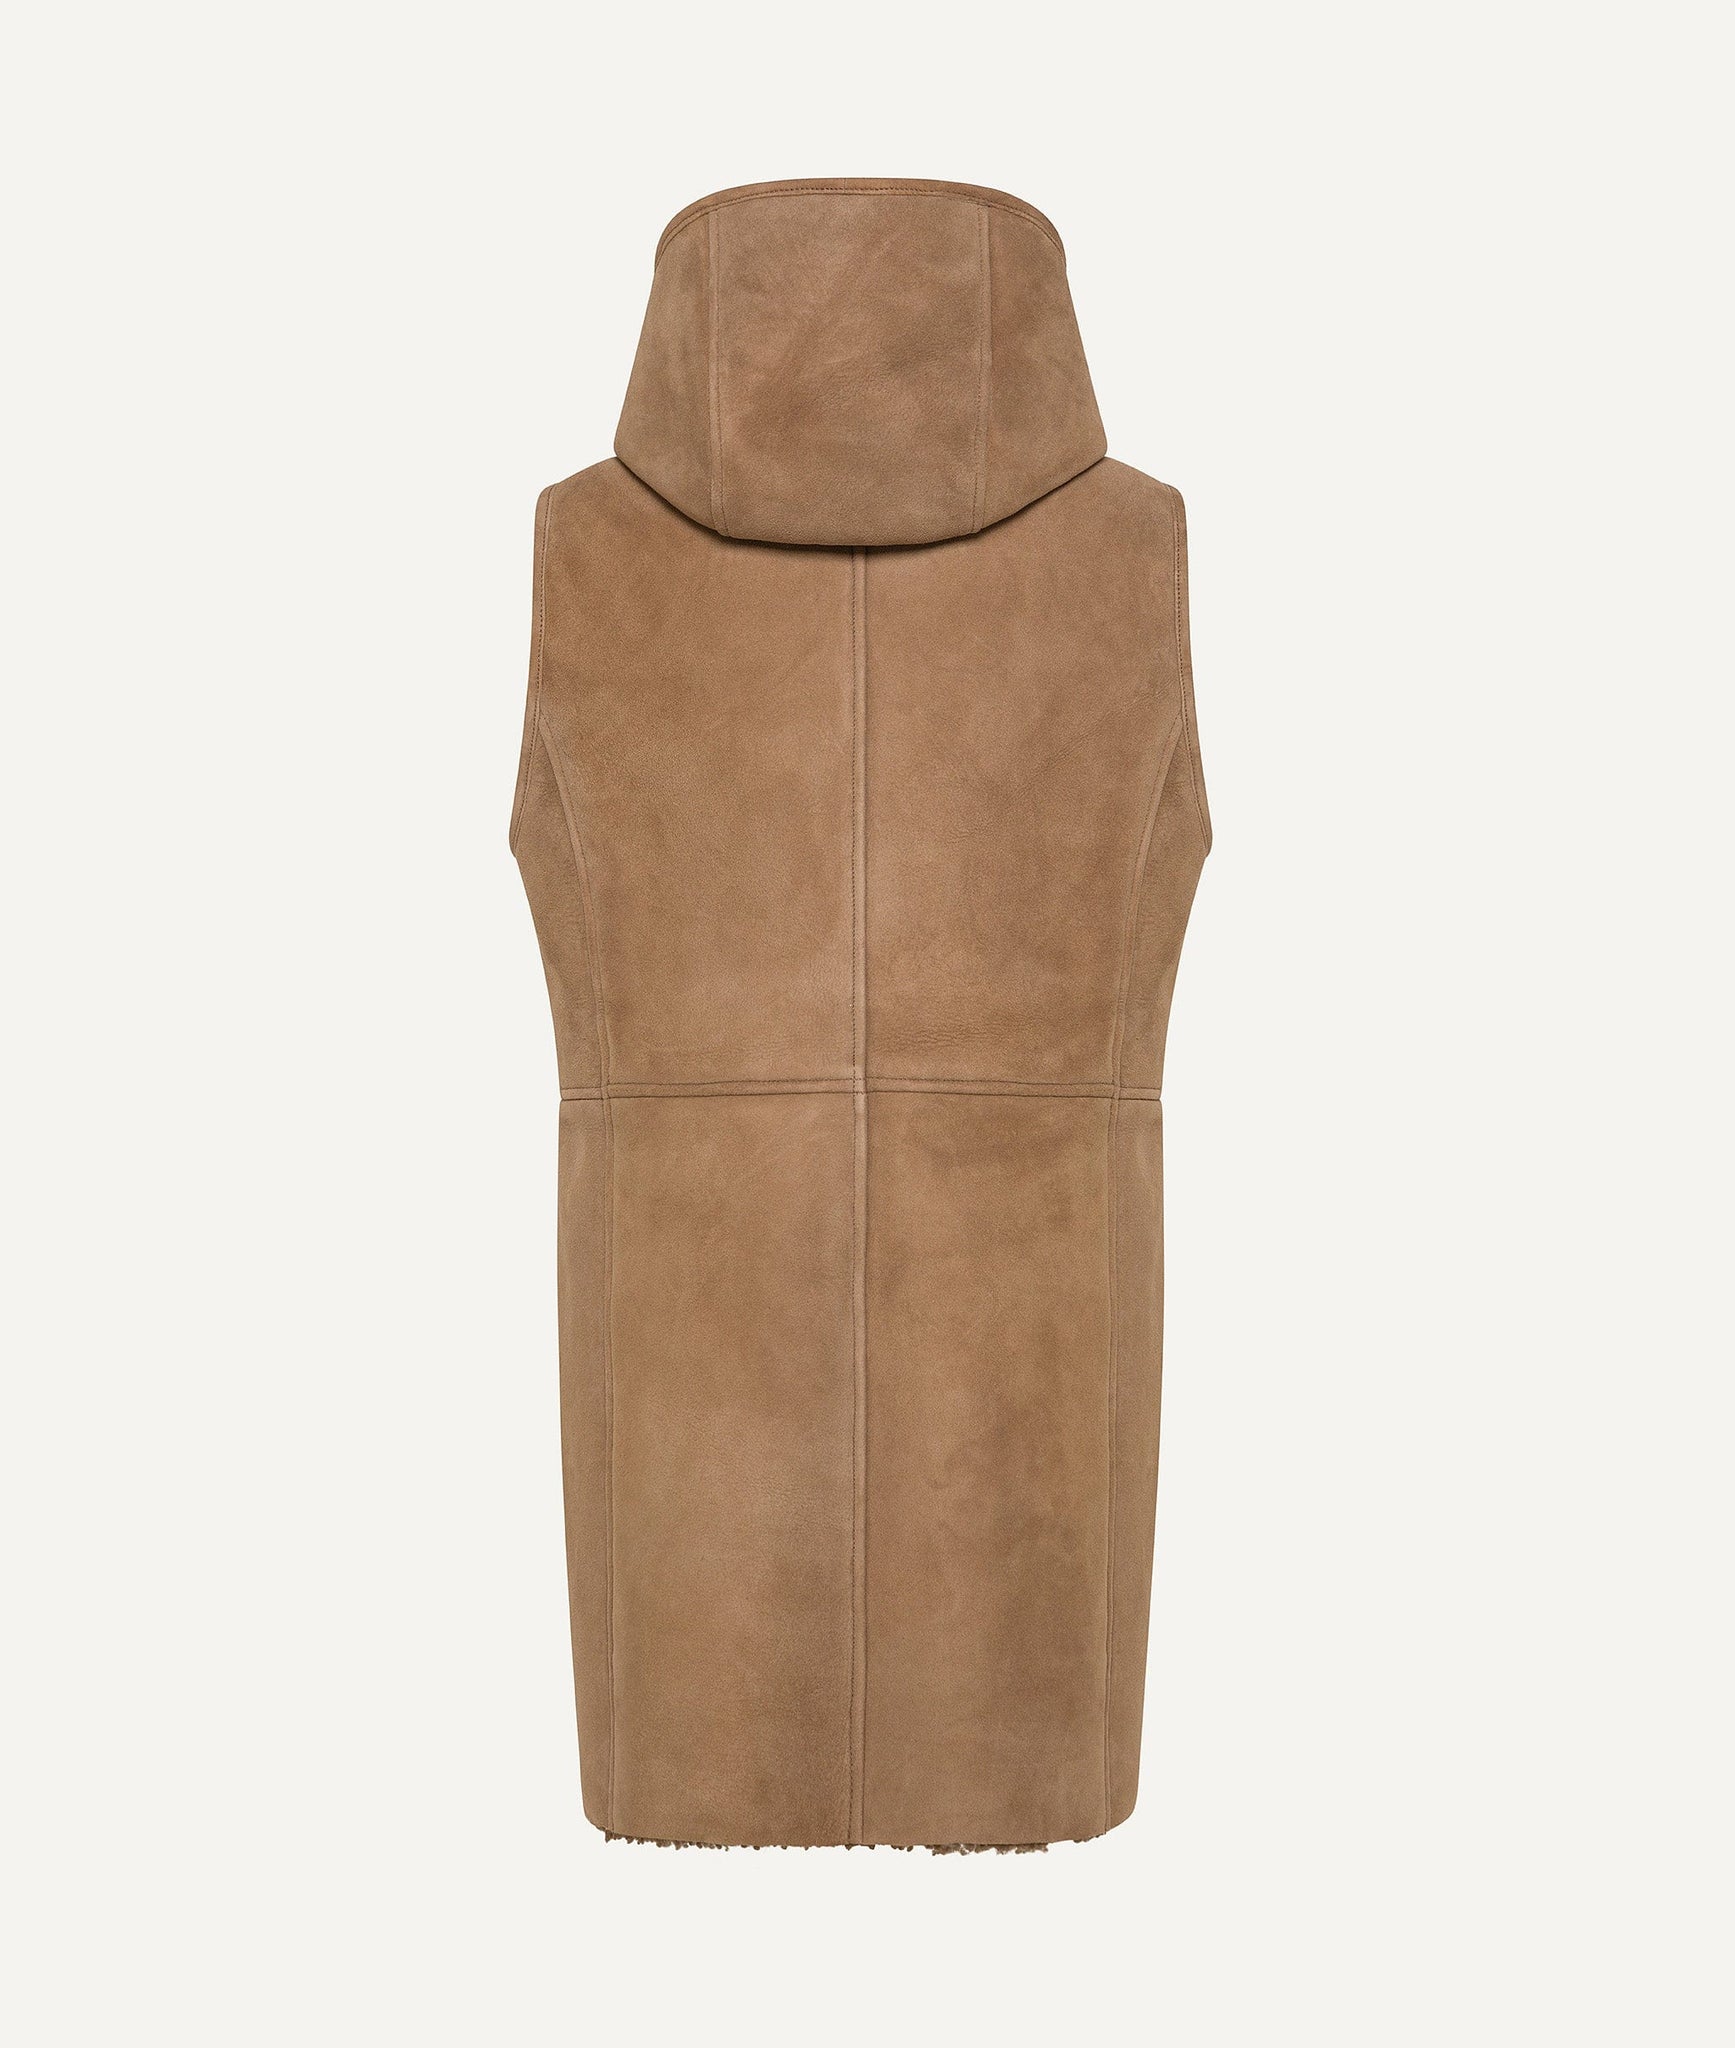 Shearling Sleeveless Coat in Suede